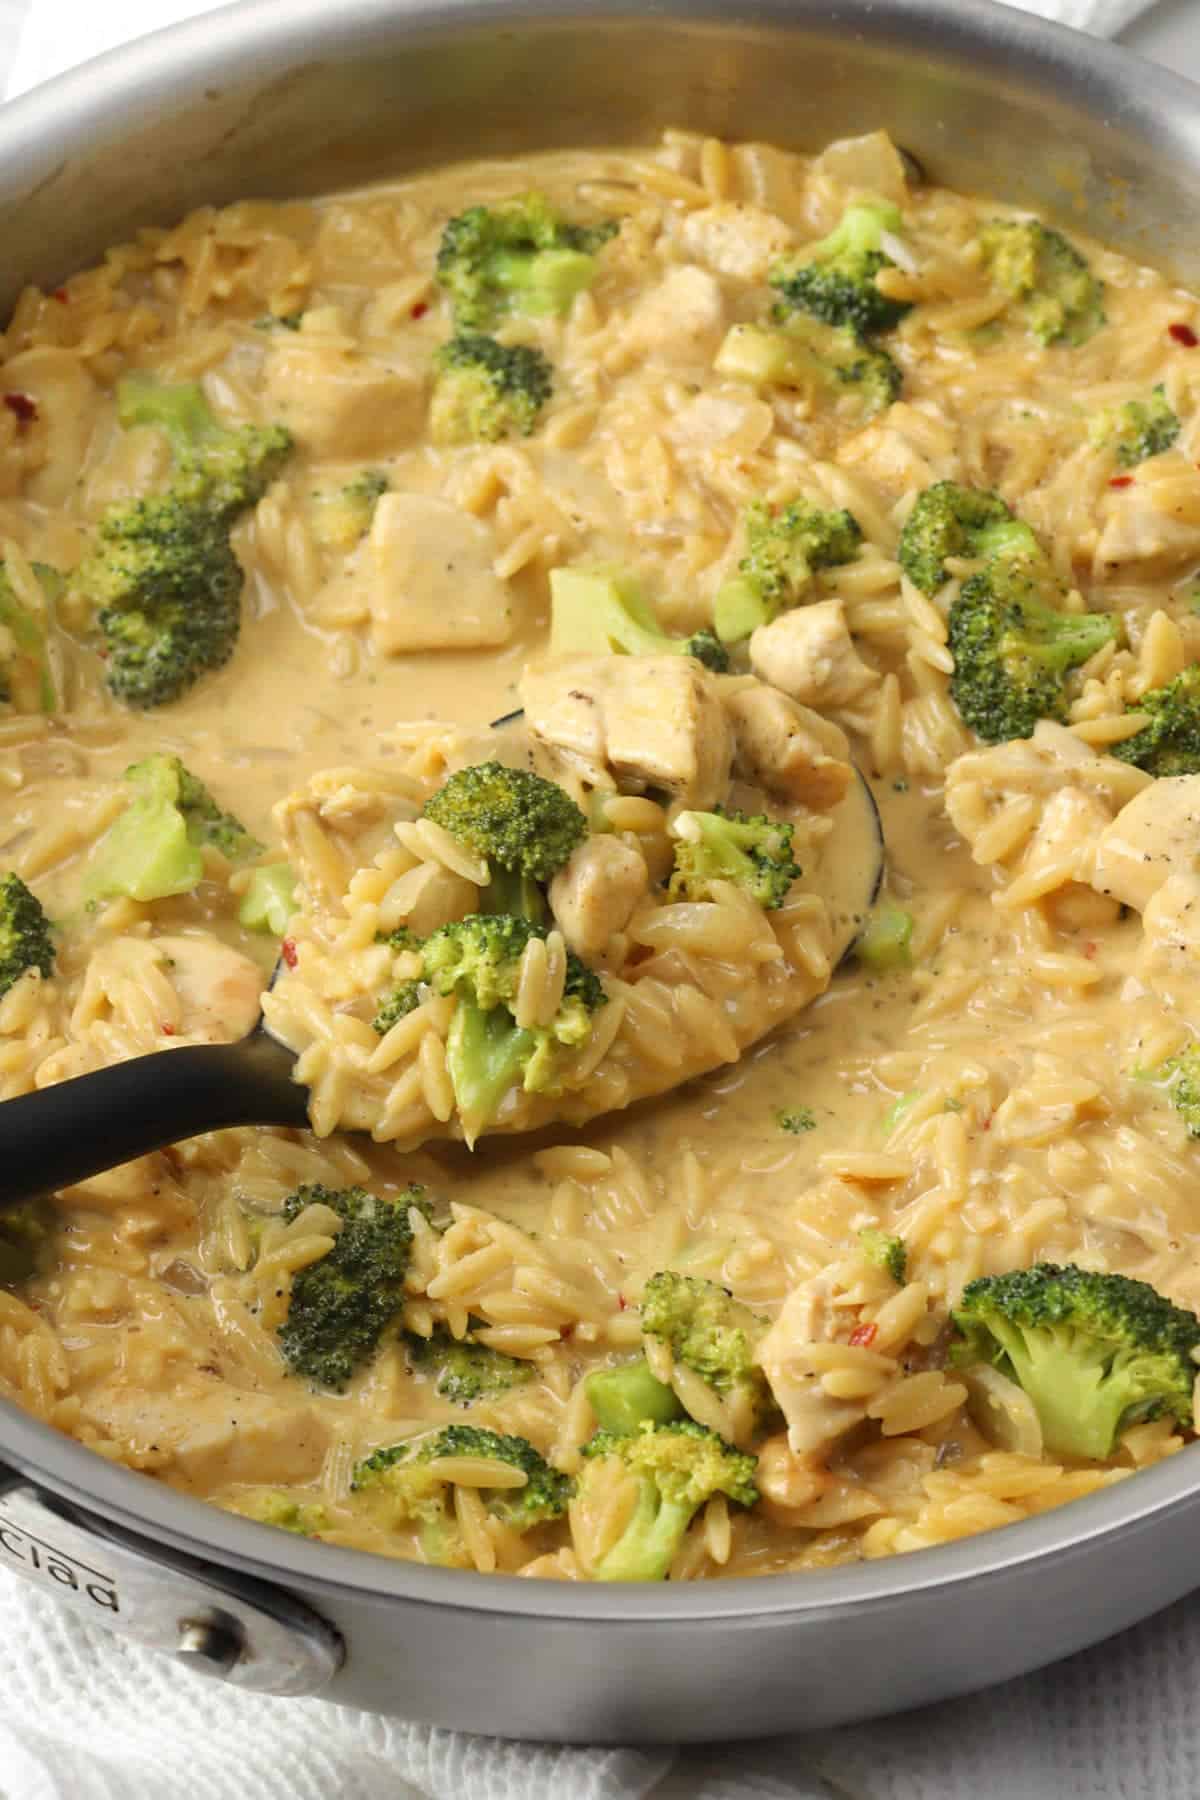 A serving spoon scooping cheesy chicken broccoli orzo from a sauté pan.